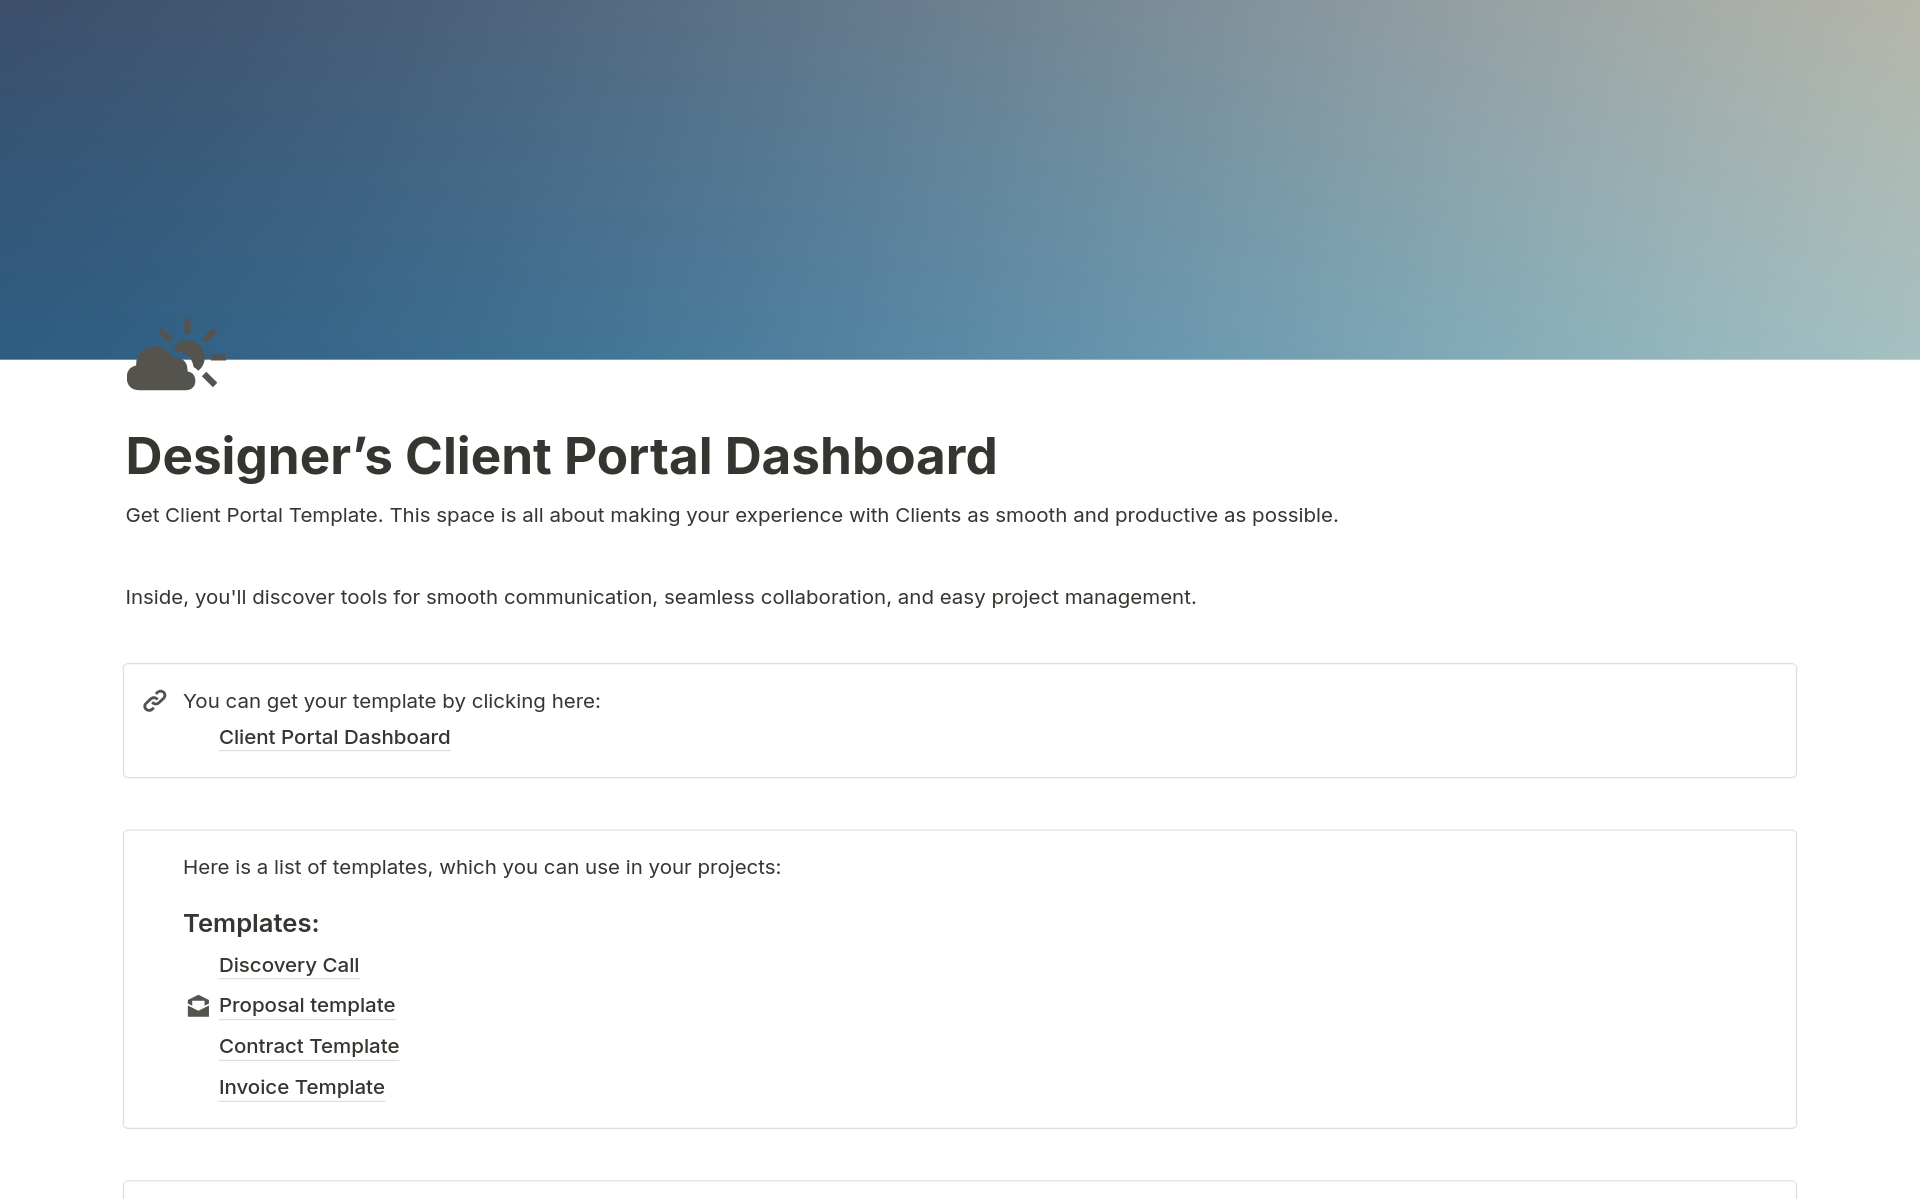 Client Portal Template & Essential Resources

This template is for those who are at the beginning of their freelance journey and facing challenges in dealing with clients, as well as those who want to improve their management process.